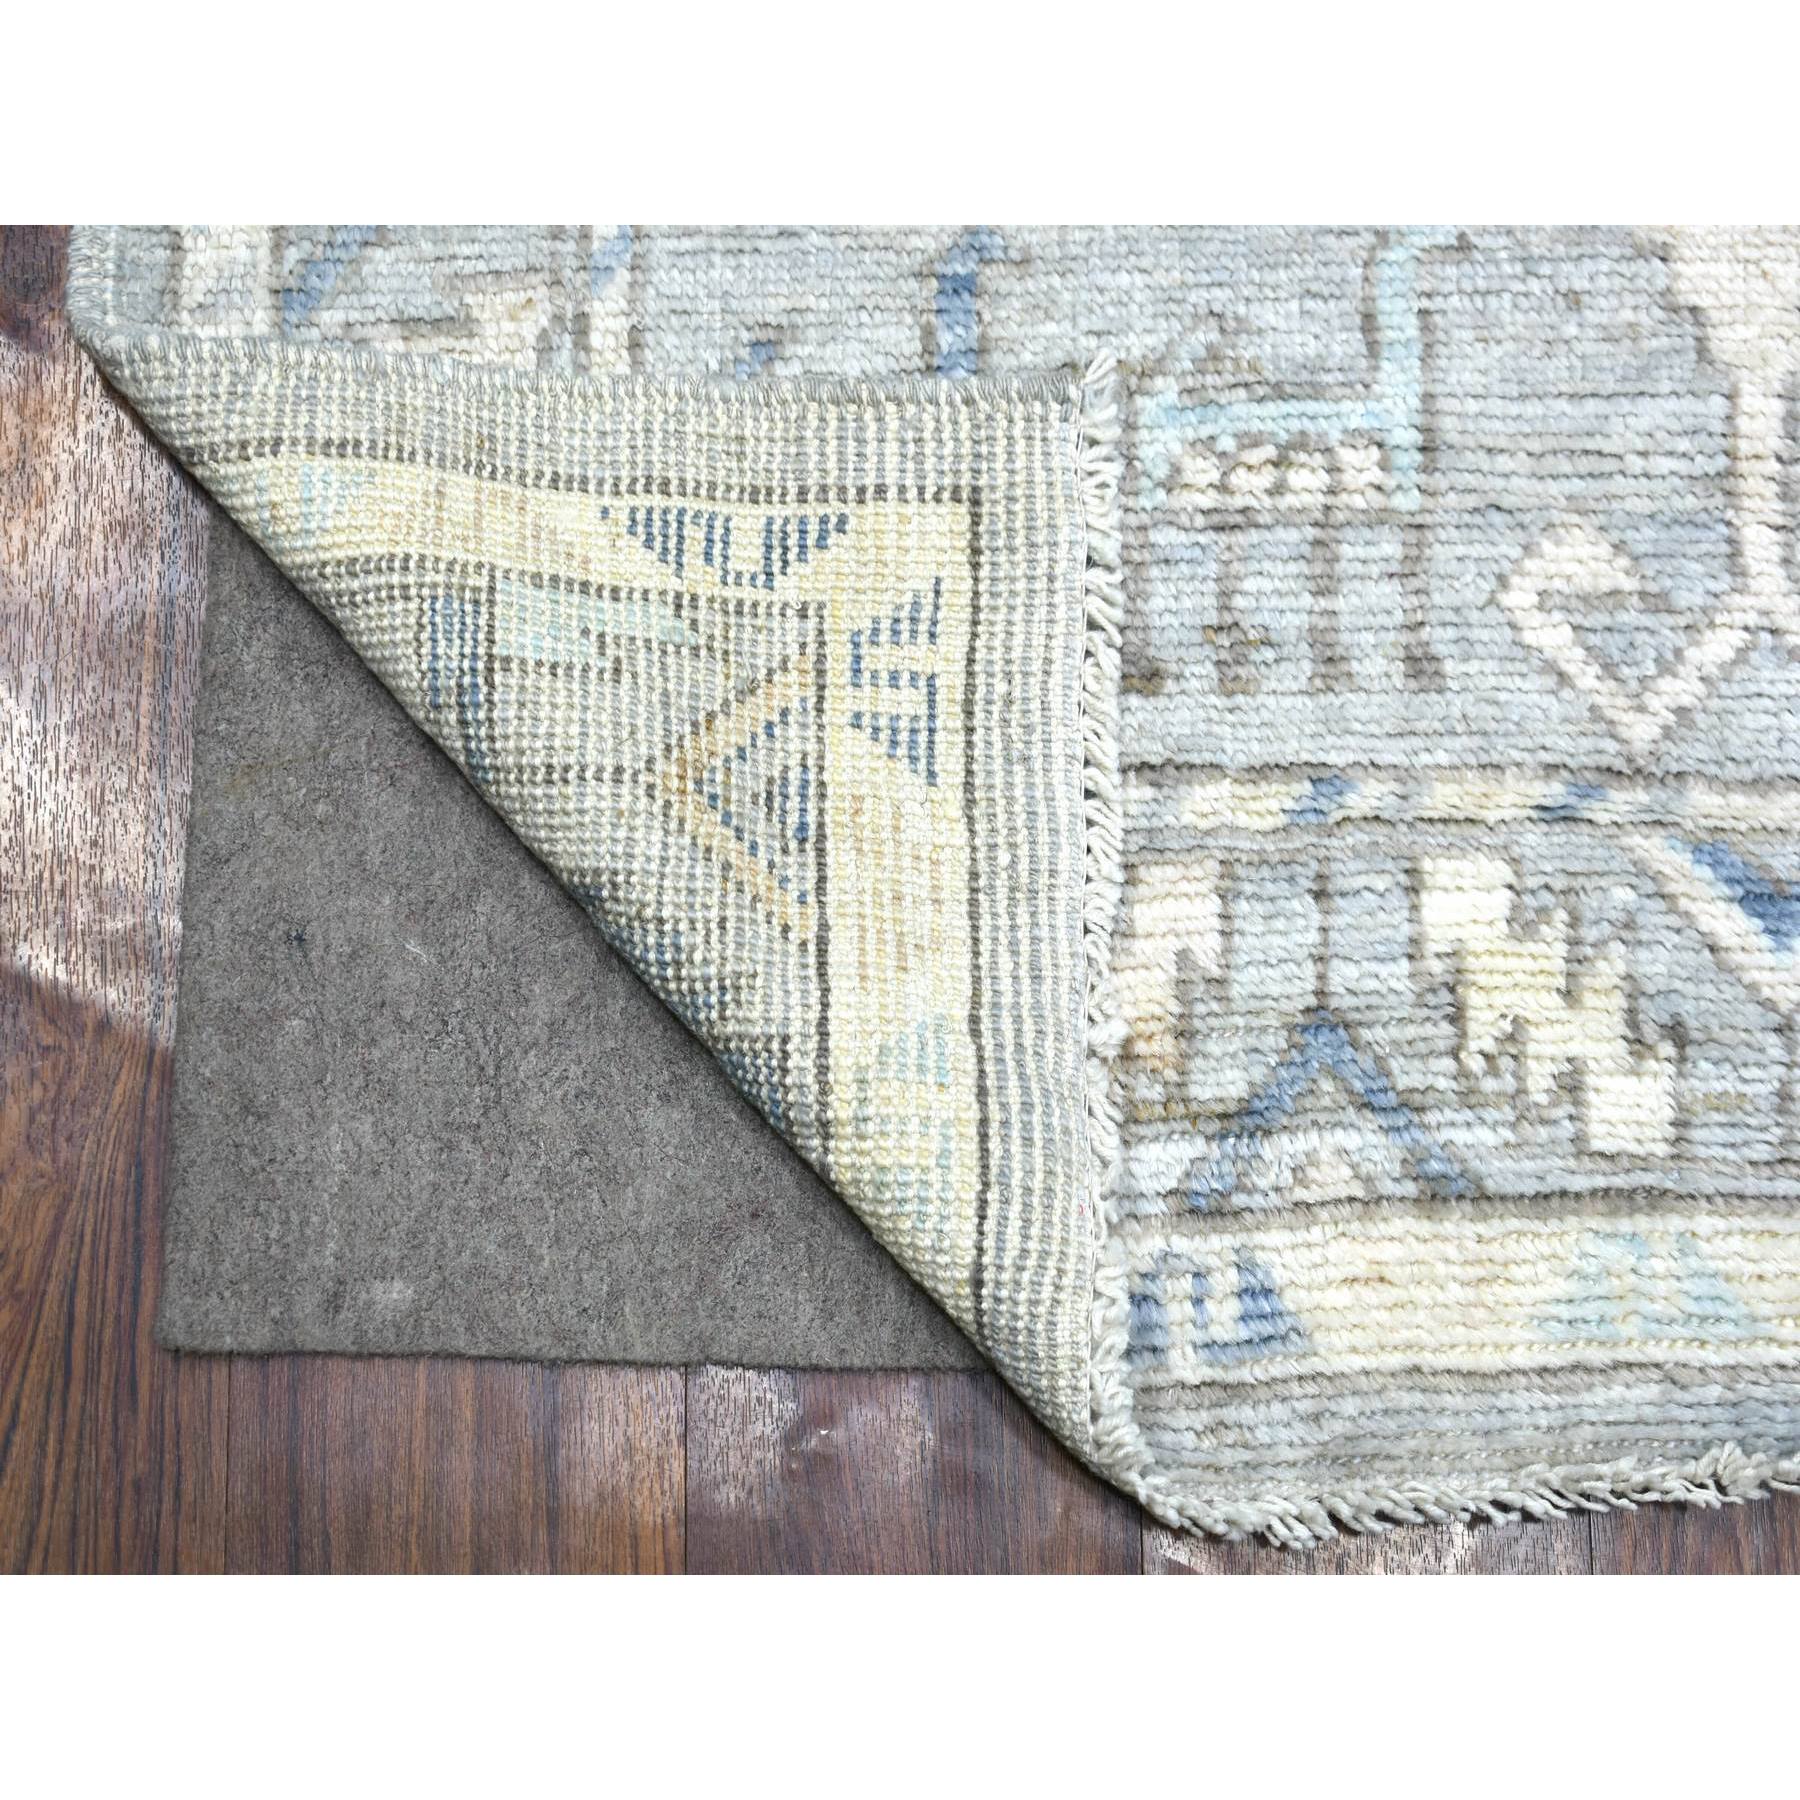 4'x10' Light Blue, Soft Wool Hand Woven, Anatolian Village Inspired Geometric Medallion Design with Animal Figurines Natural Dyes, Wide Runner Oriental Rug 